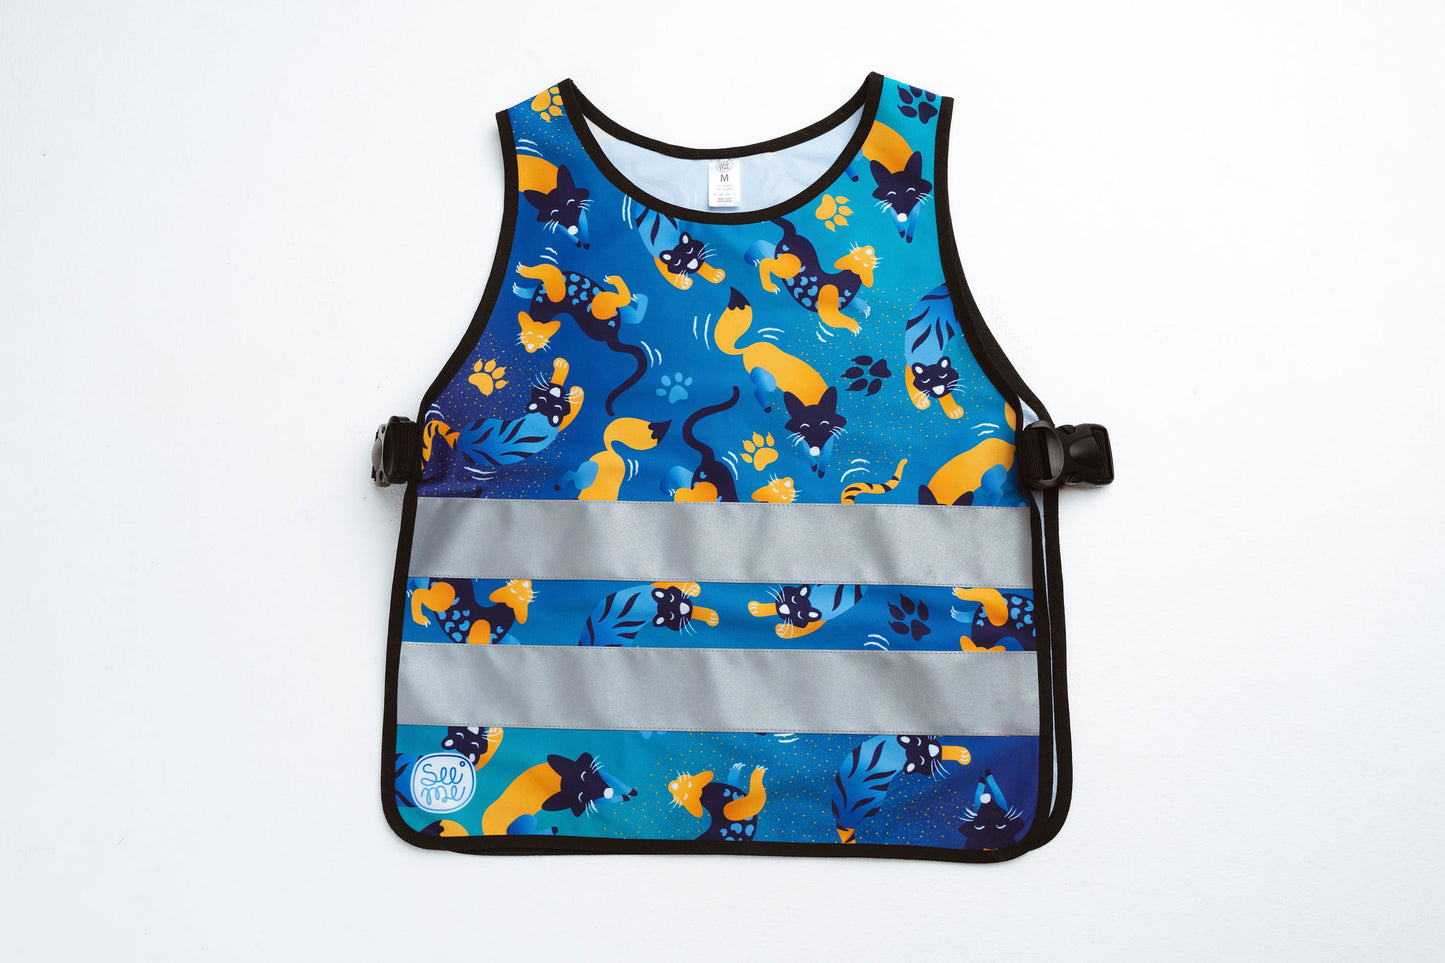 Blue safety vest for kids with foxes